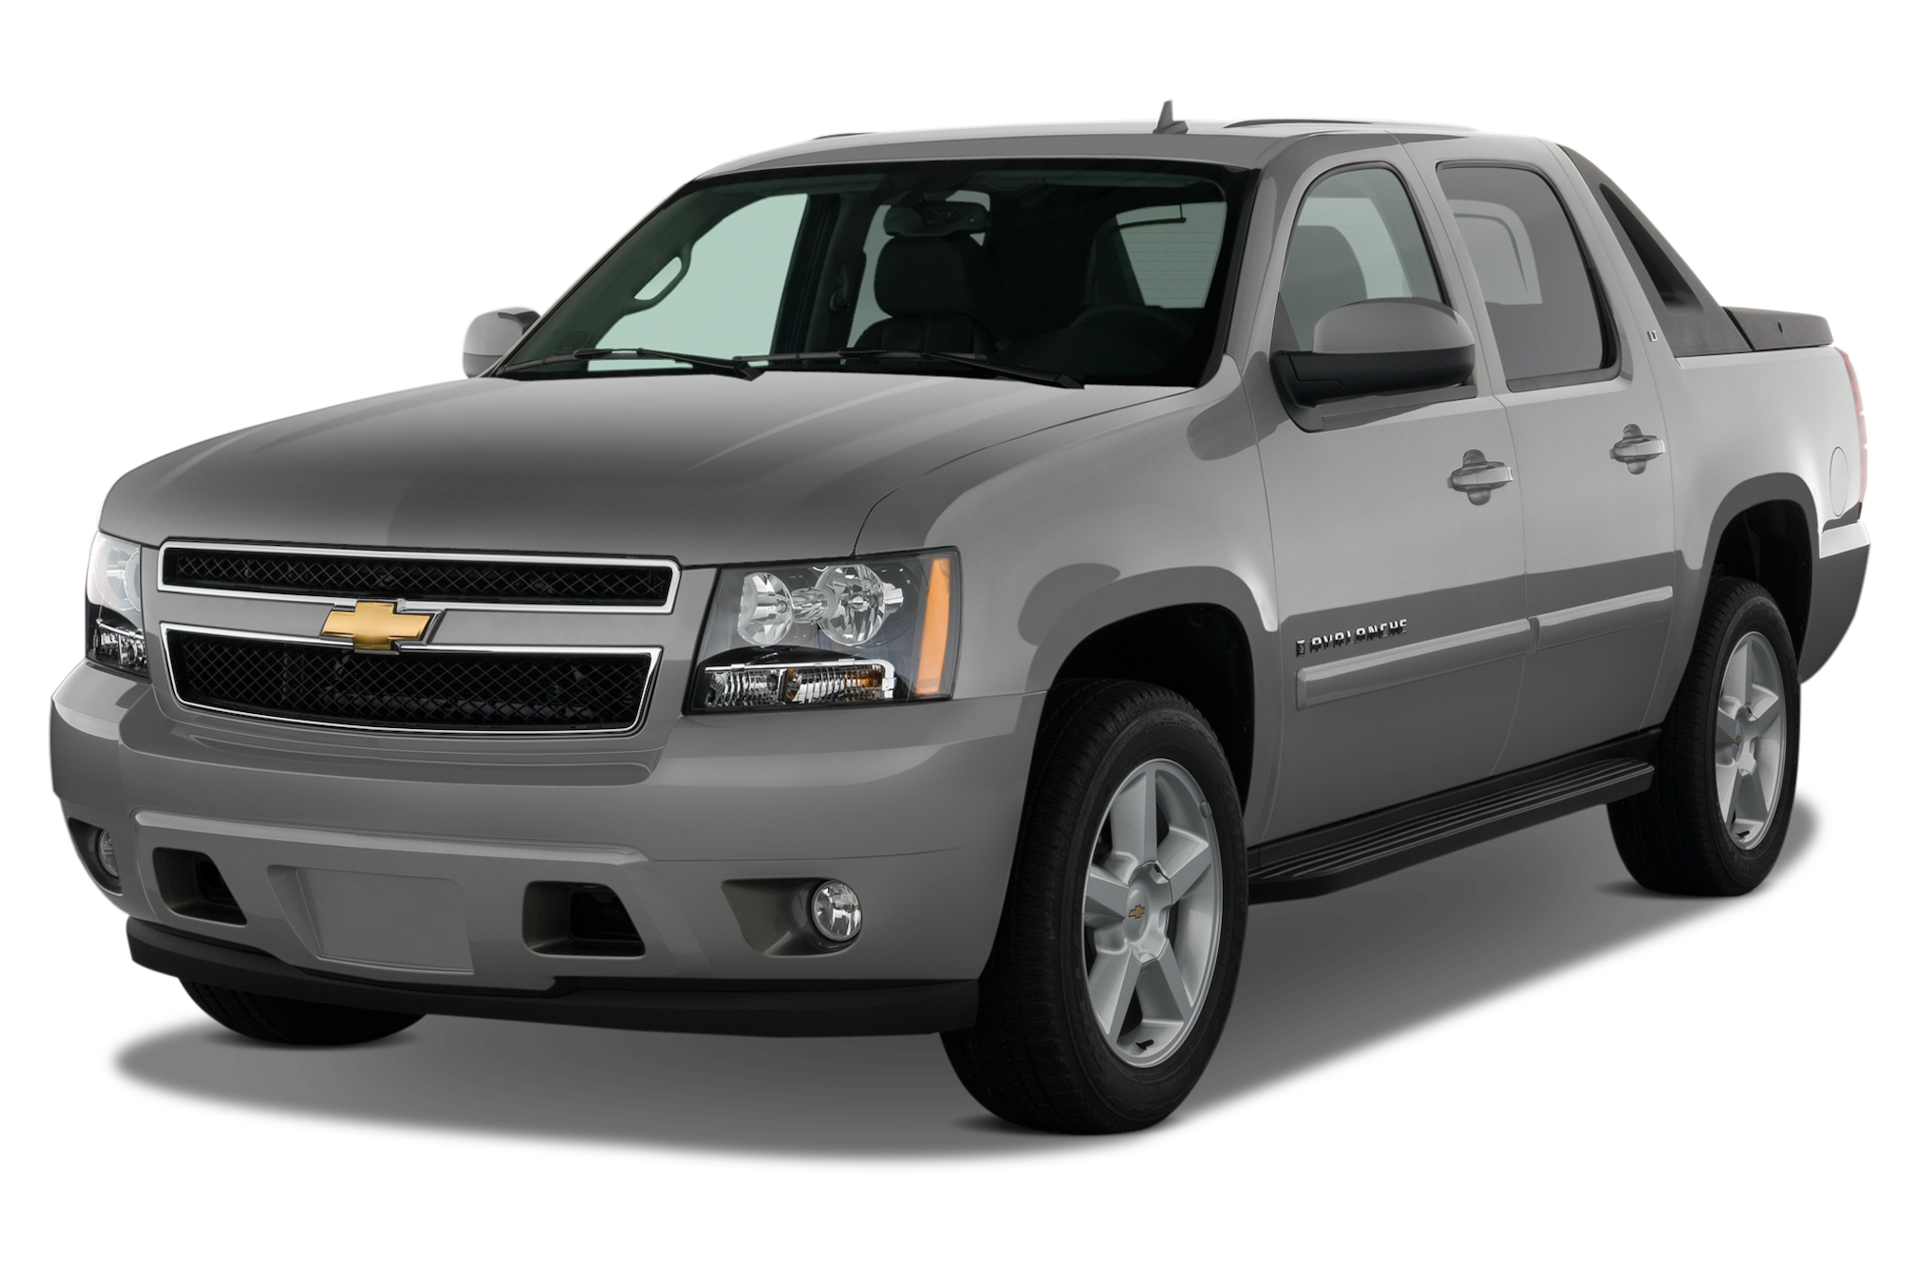 2013 Chevrolet Avalanche Prices, Reviews, and Photos - MotorTrend